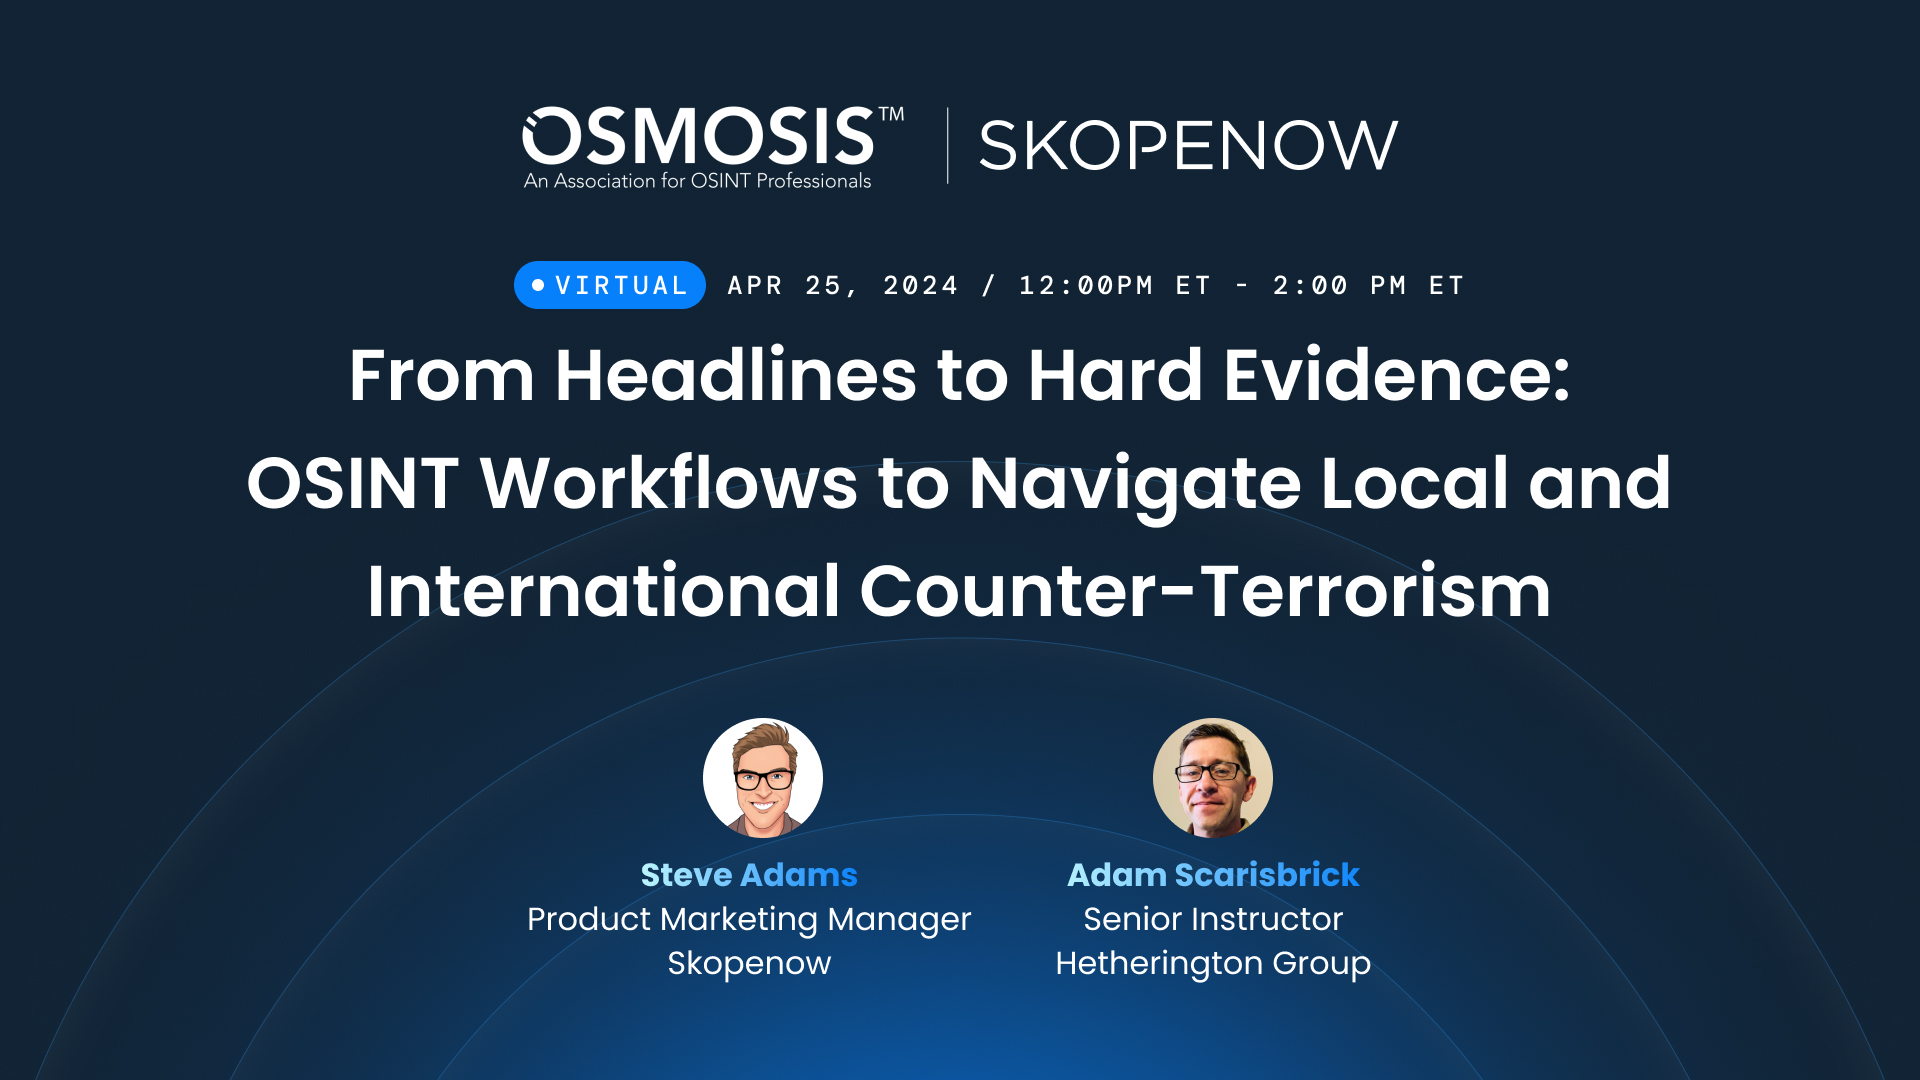 OSMOSIS Webinar: From Headlines to Hard Evidence: OSINT Workflows to Navigate Local and International Counter-Terrorism